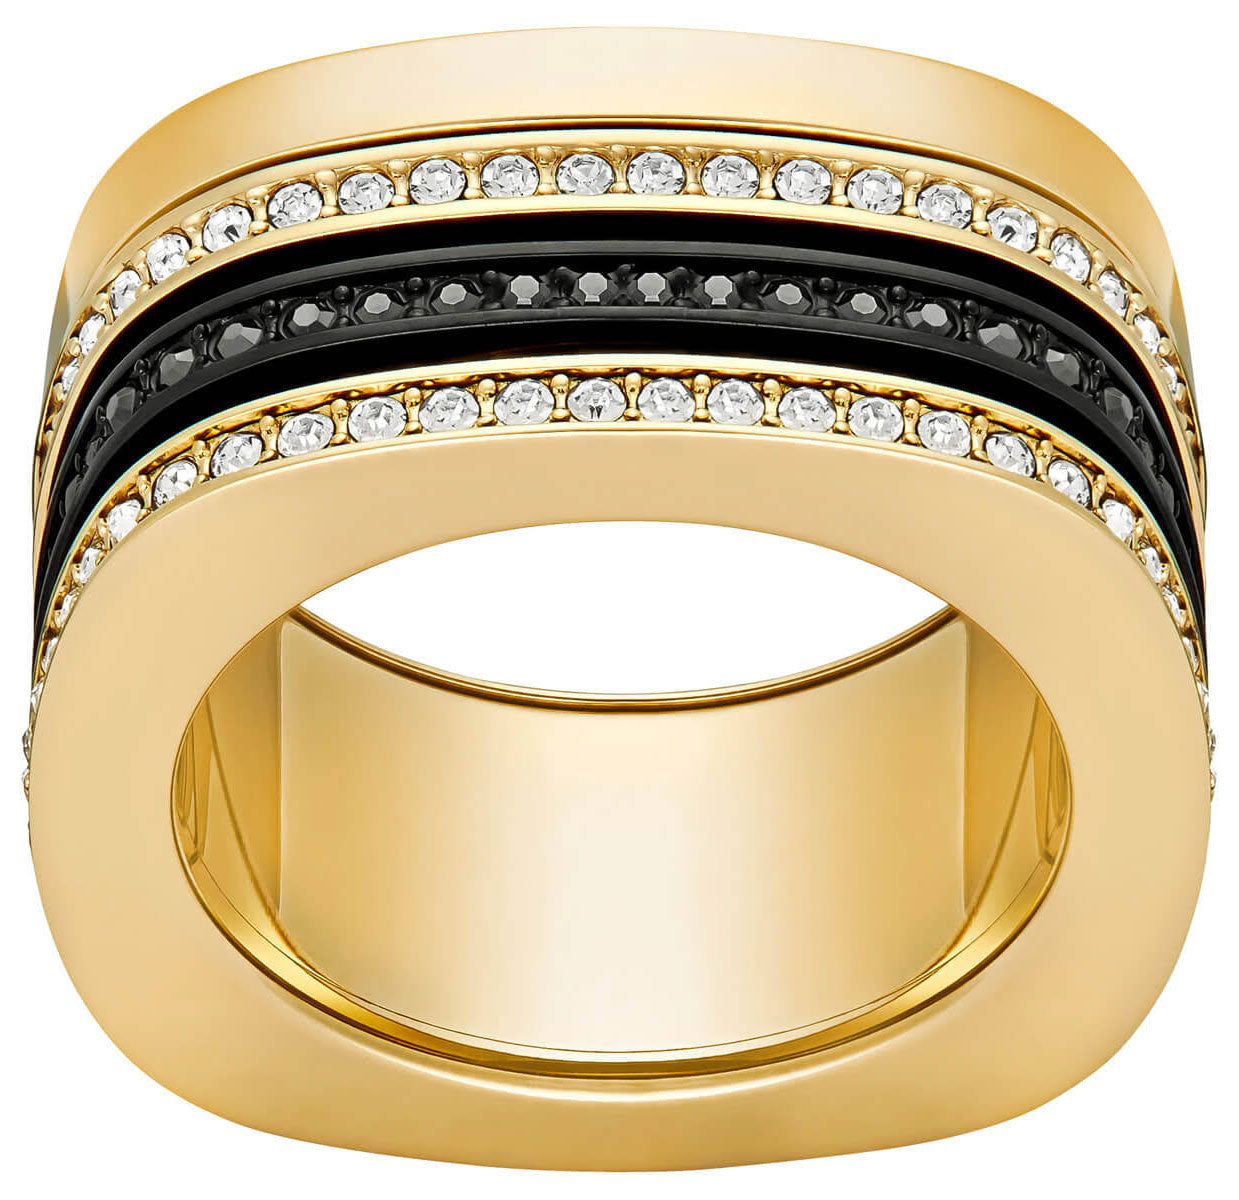 update alt-text with template Jewelry - Ring-Swarovski-5143854-7 / 55, black, black tone, clear, crystals, ring, rings, rpSKU_5017113, rpSKU_5139701, rpSKU_5152856, rpSKU_5184229, rpSKU_5184233, stainless steel, Swarovski crystals, Swarovski Jewelry, Vio, womens, yellow gold-tone-Watches & Beyond